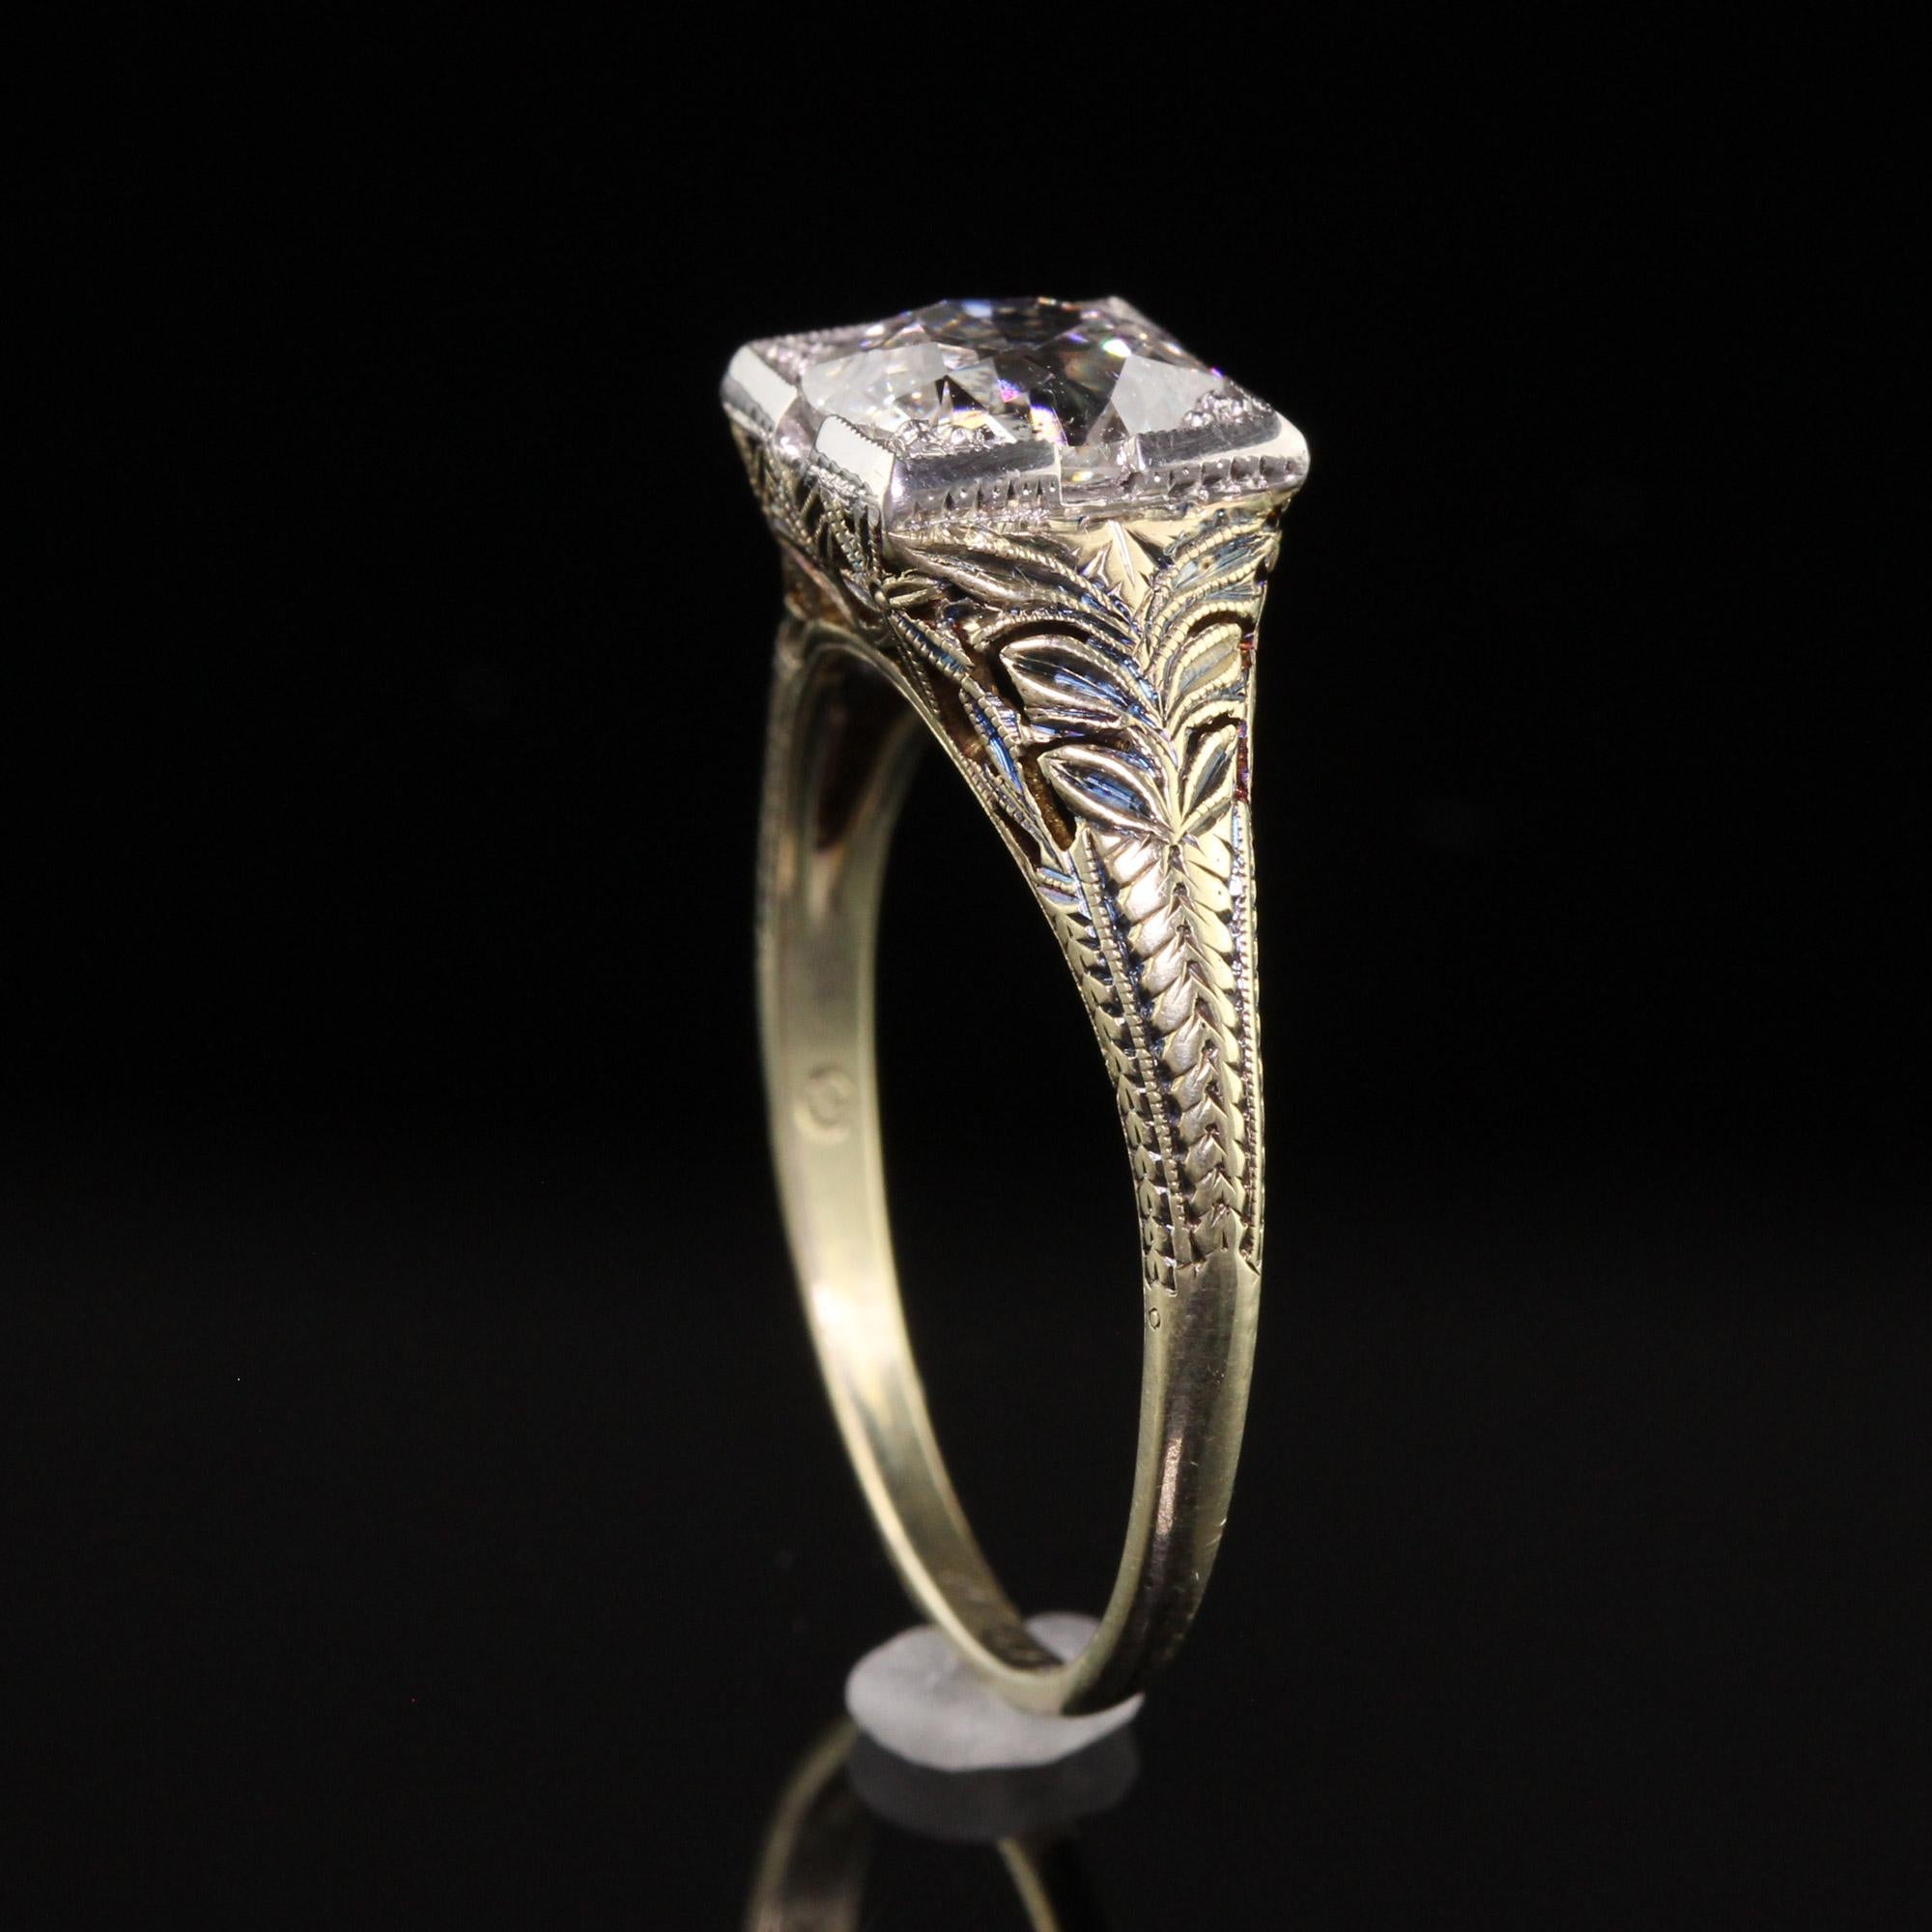 Antique Art Deco 14k Yellow Gold Filigree Old Euro Diamond Engagement Ring, GIA For Sale 2